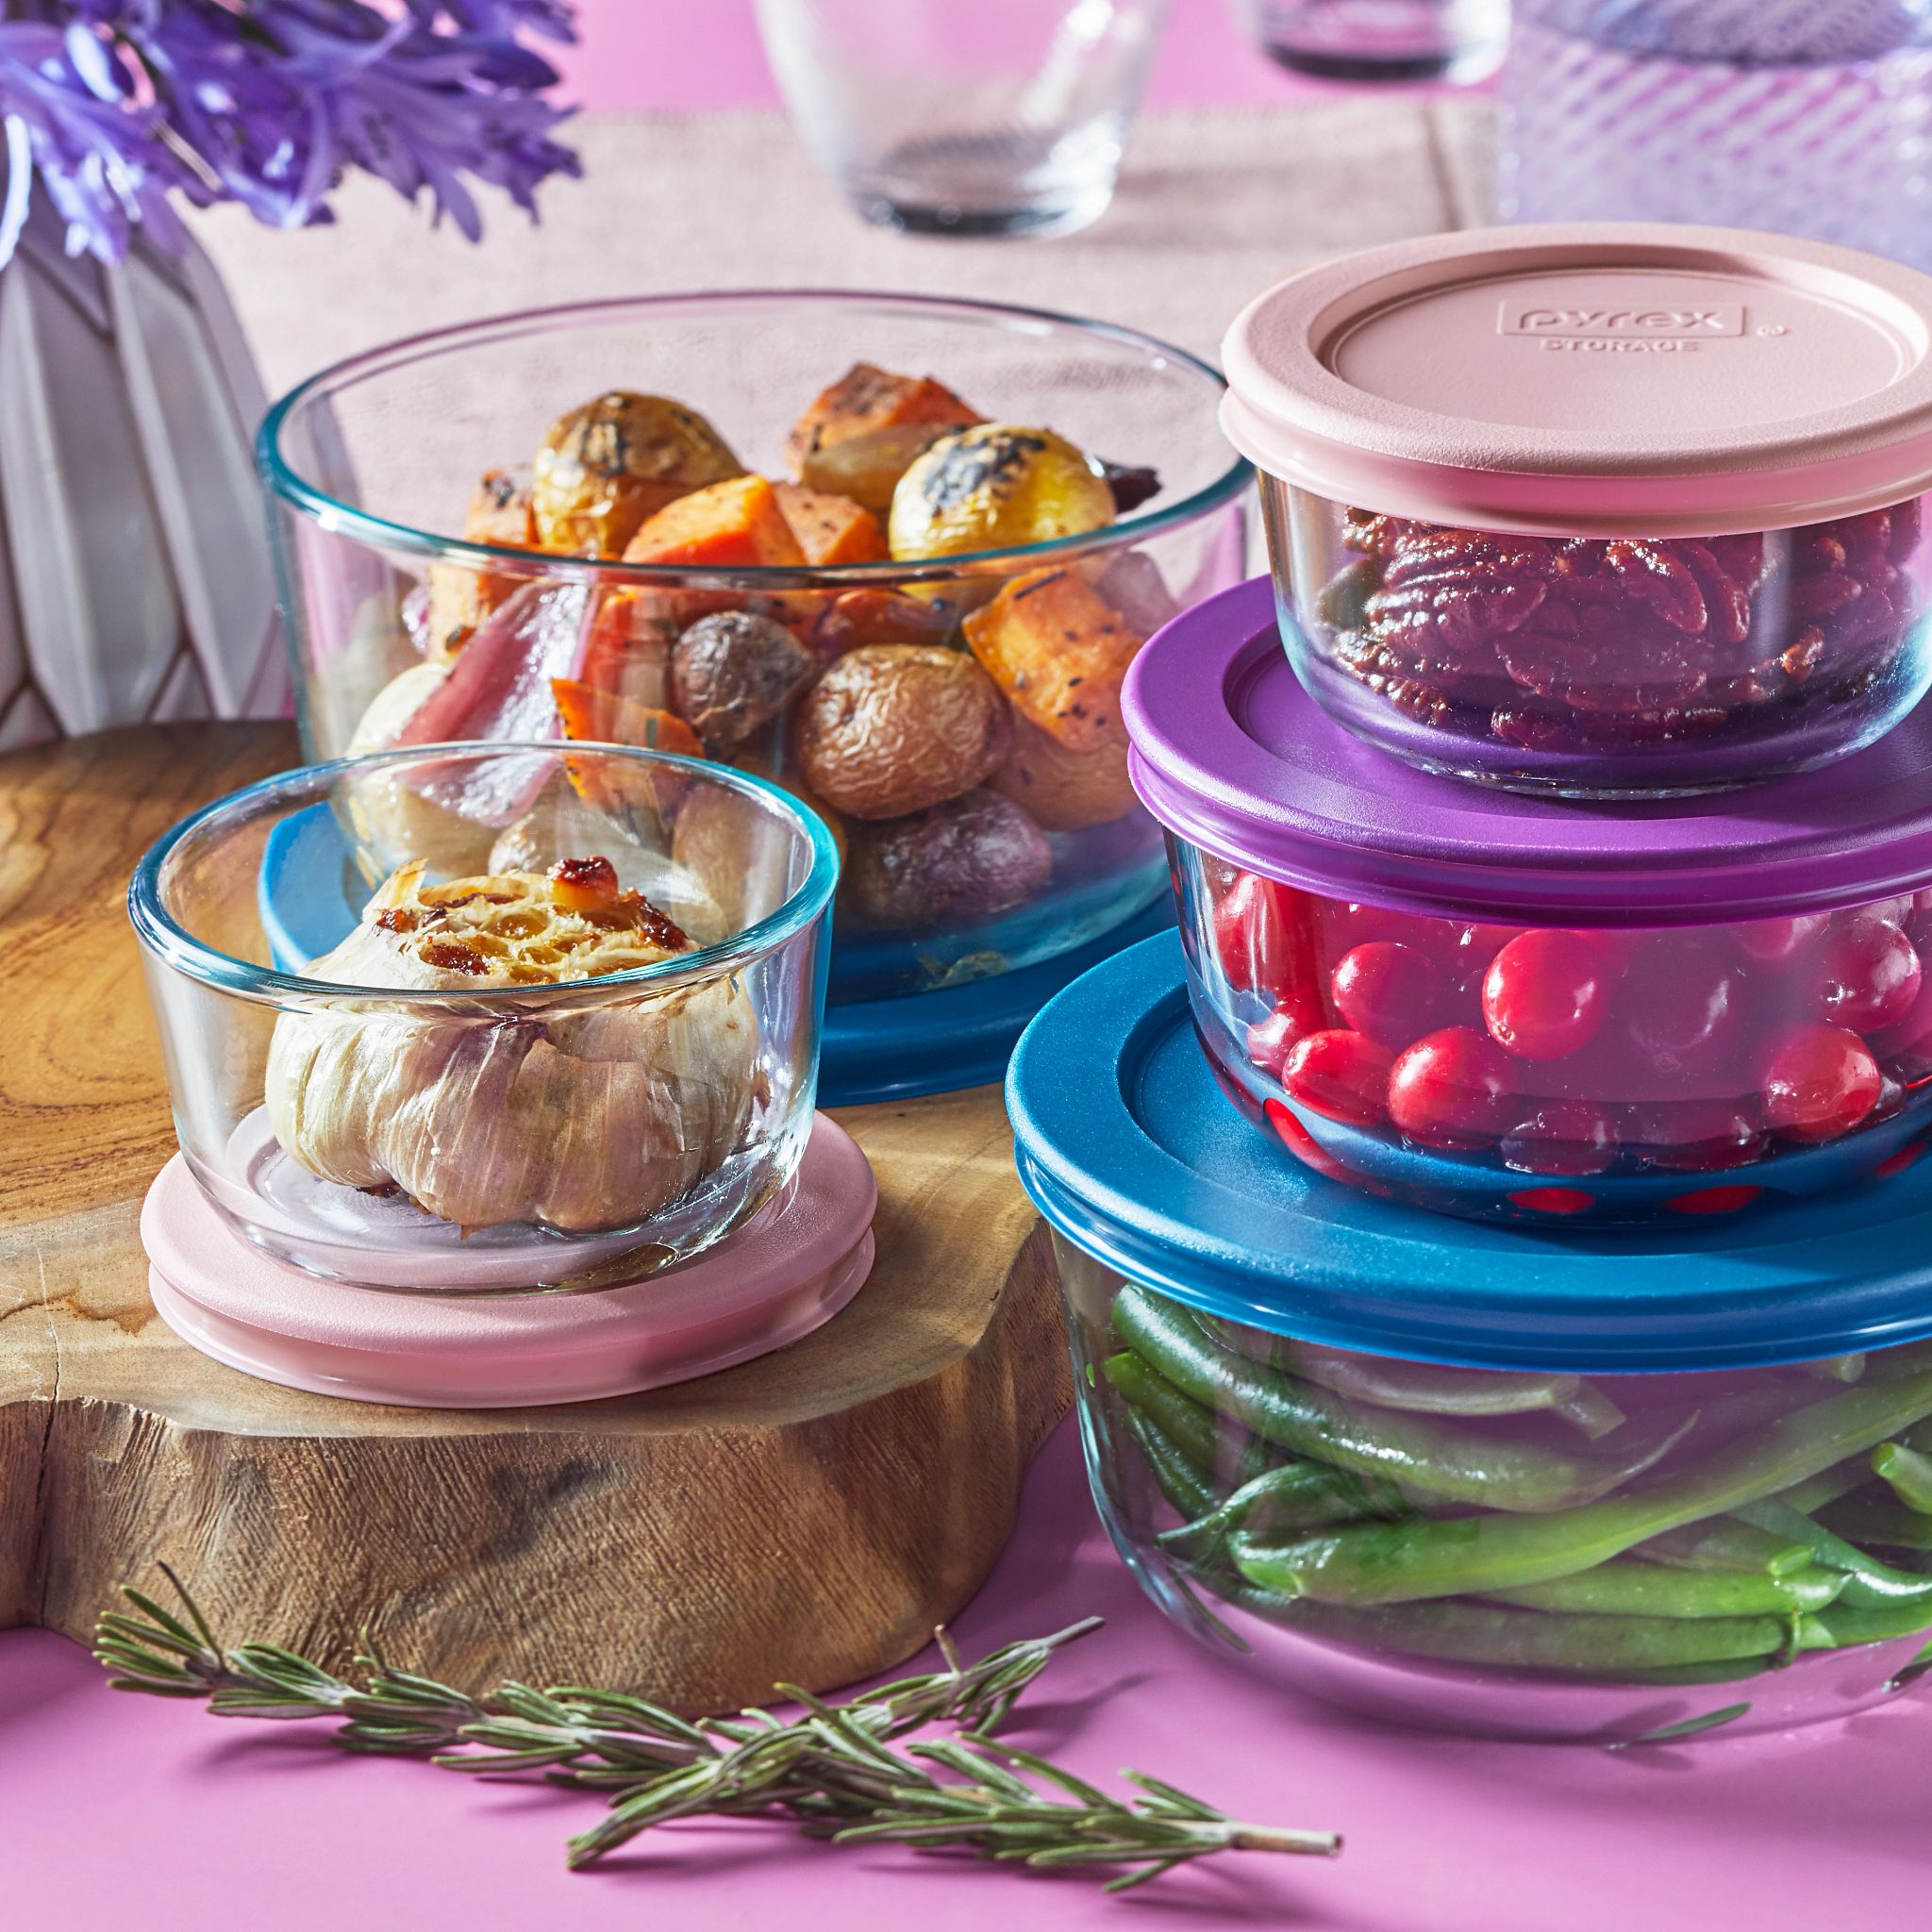 Pyrex Simply Storage Glass Containers with Lids Set, 10 pc - Kroger